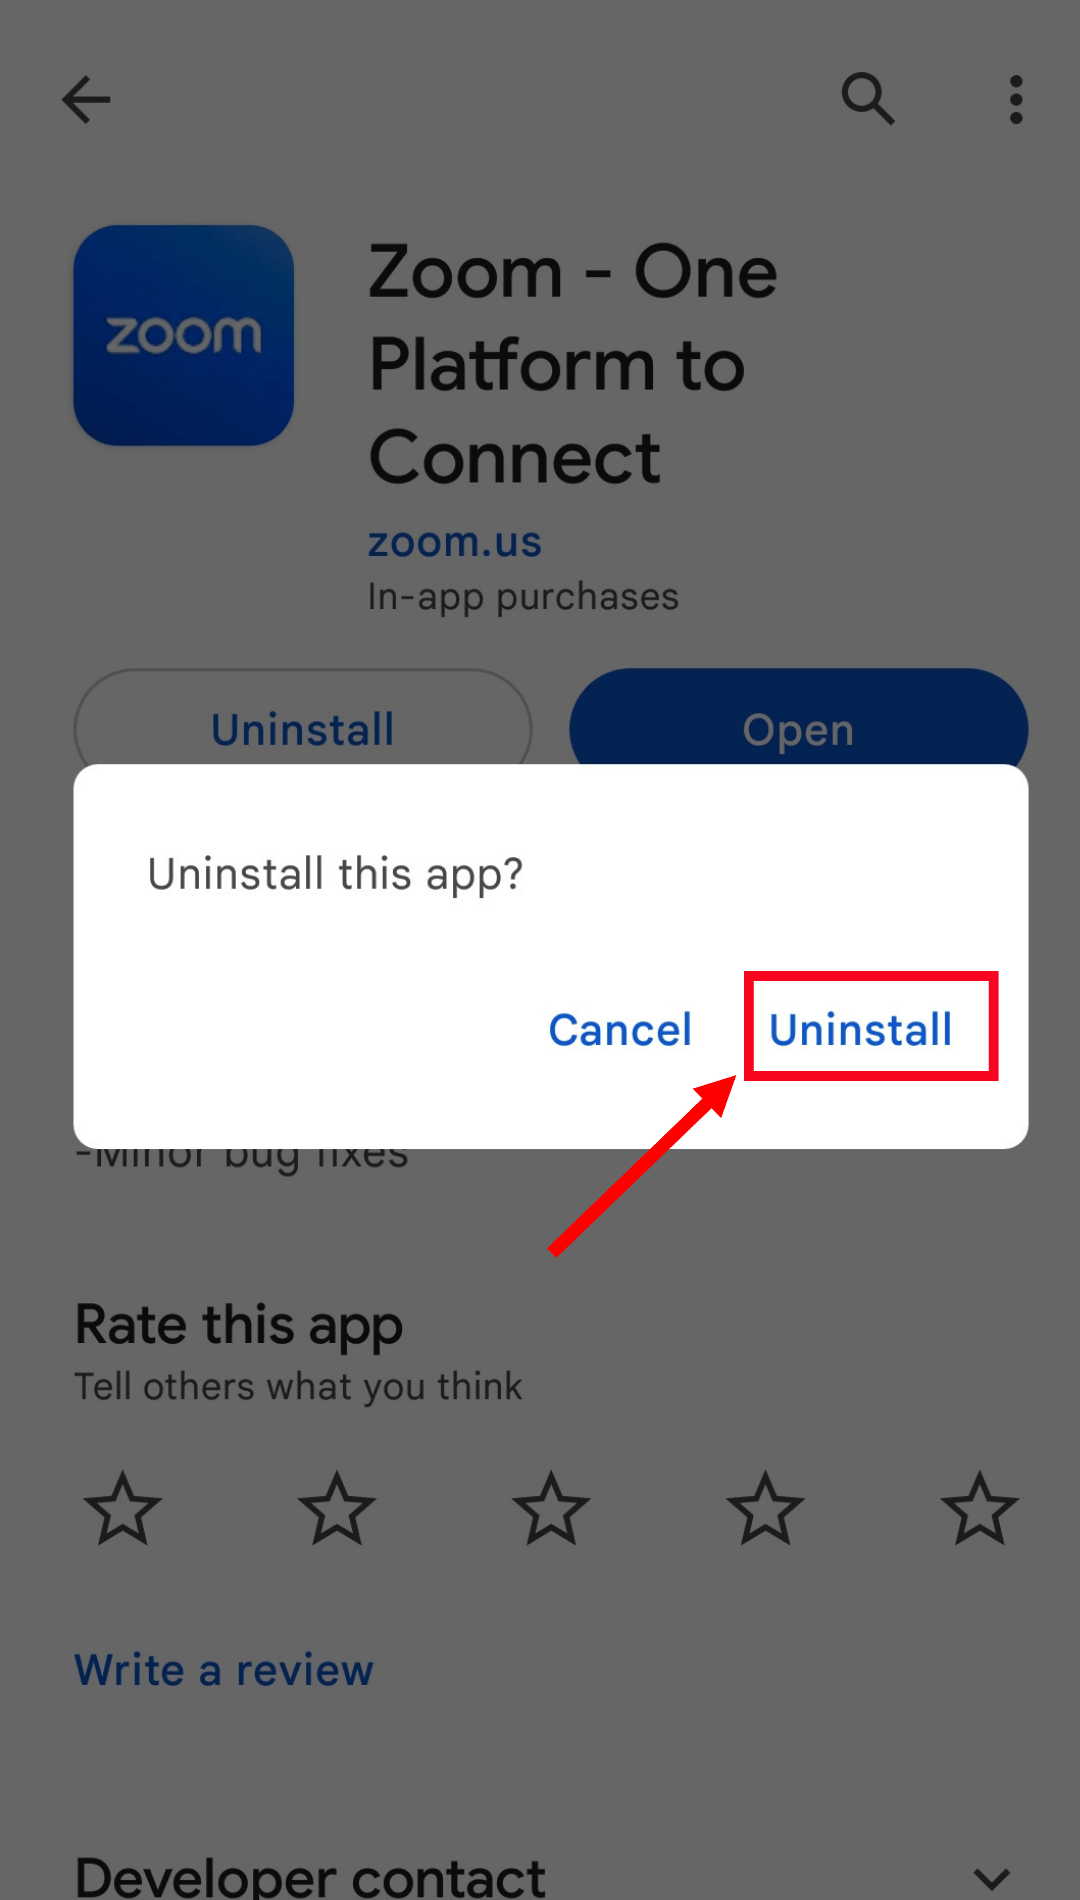 click uninstall when prompted